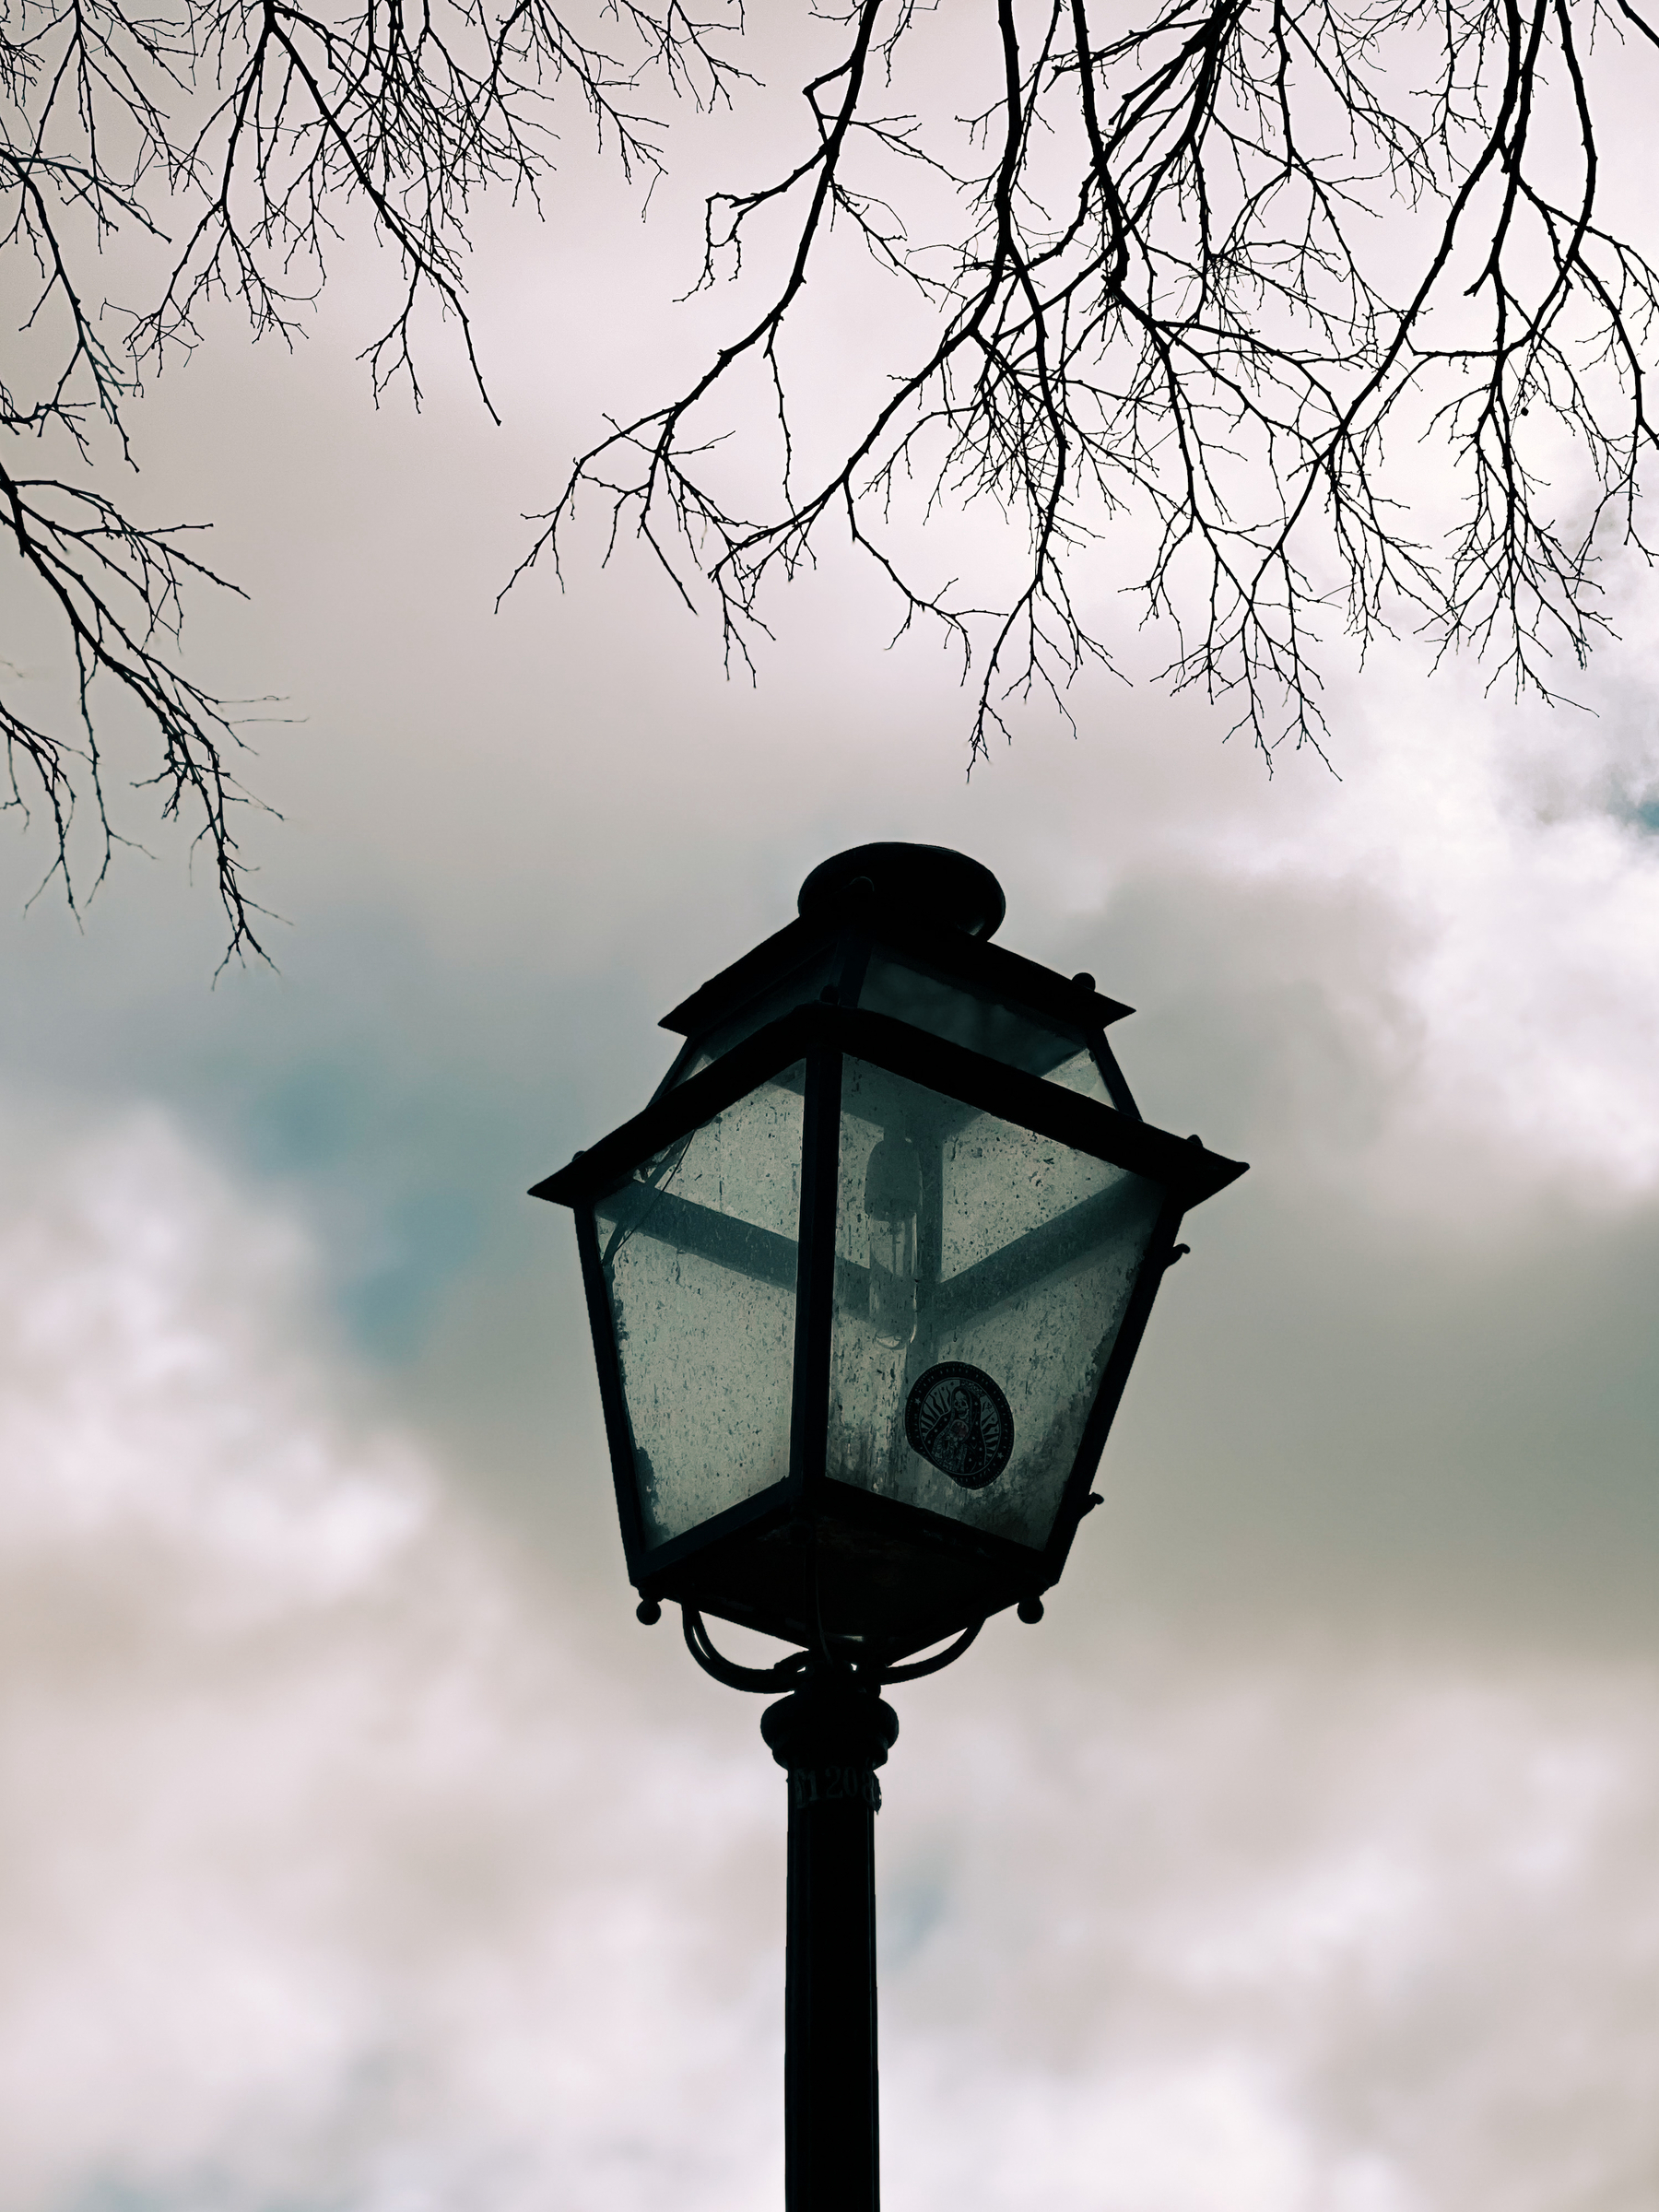 A vintage street lamp against a cloudy sky, framed by bare tree branches.